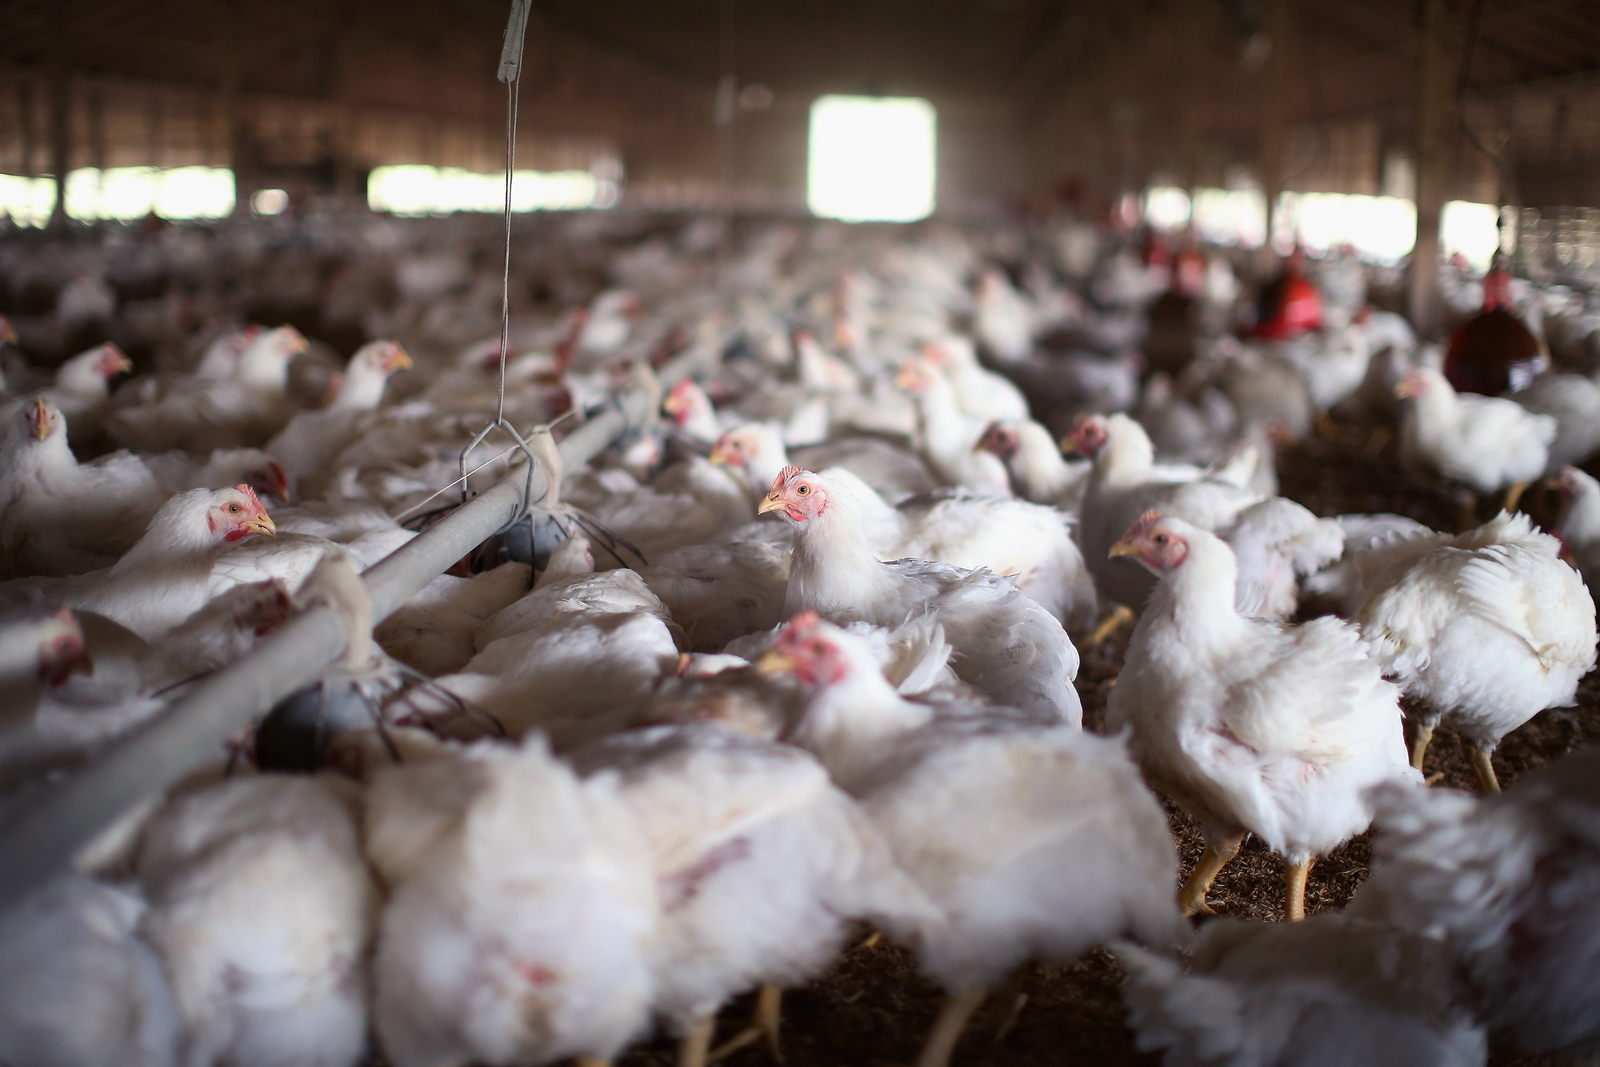 Mycotoxicosis has an effect on poultry weight gain leading to a potential reduction in carcass profit, with an ( estimated loss of $0.21 per bird.<br />[Photo: ANP]